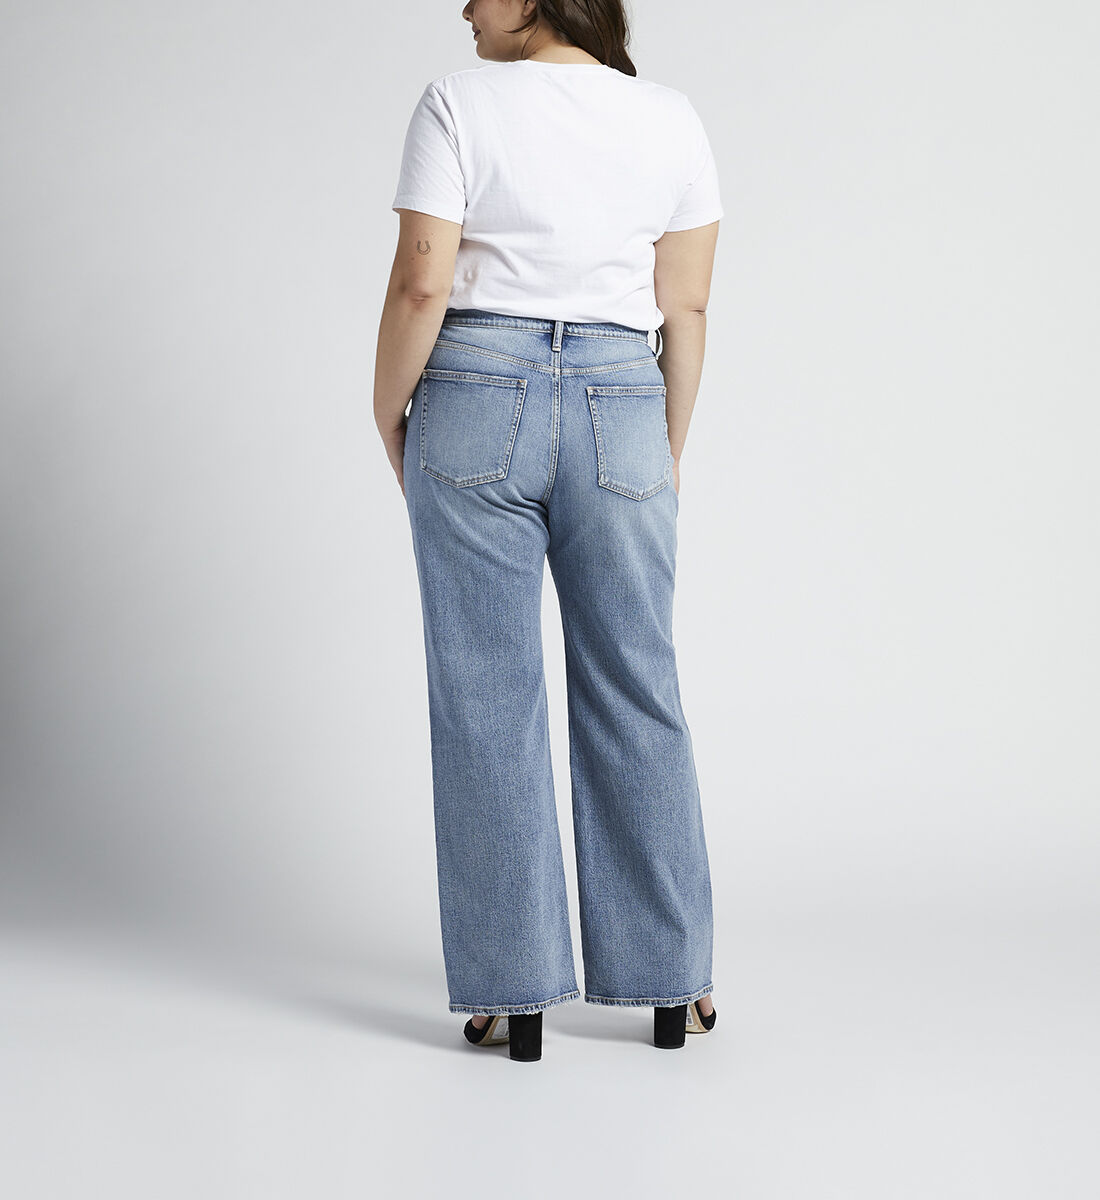 Highly Desirable High Rise Trouser Leg Jeans Plus Size Back